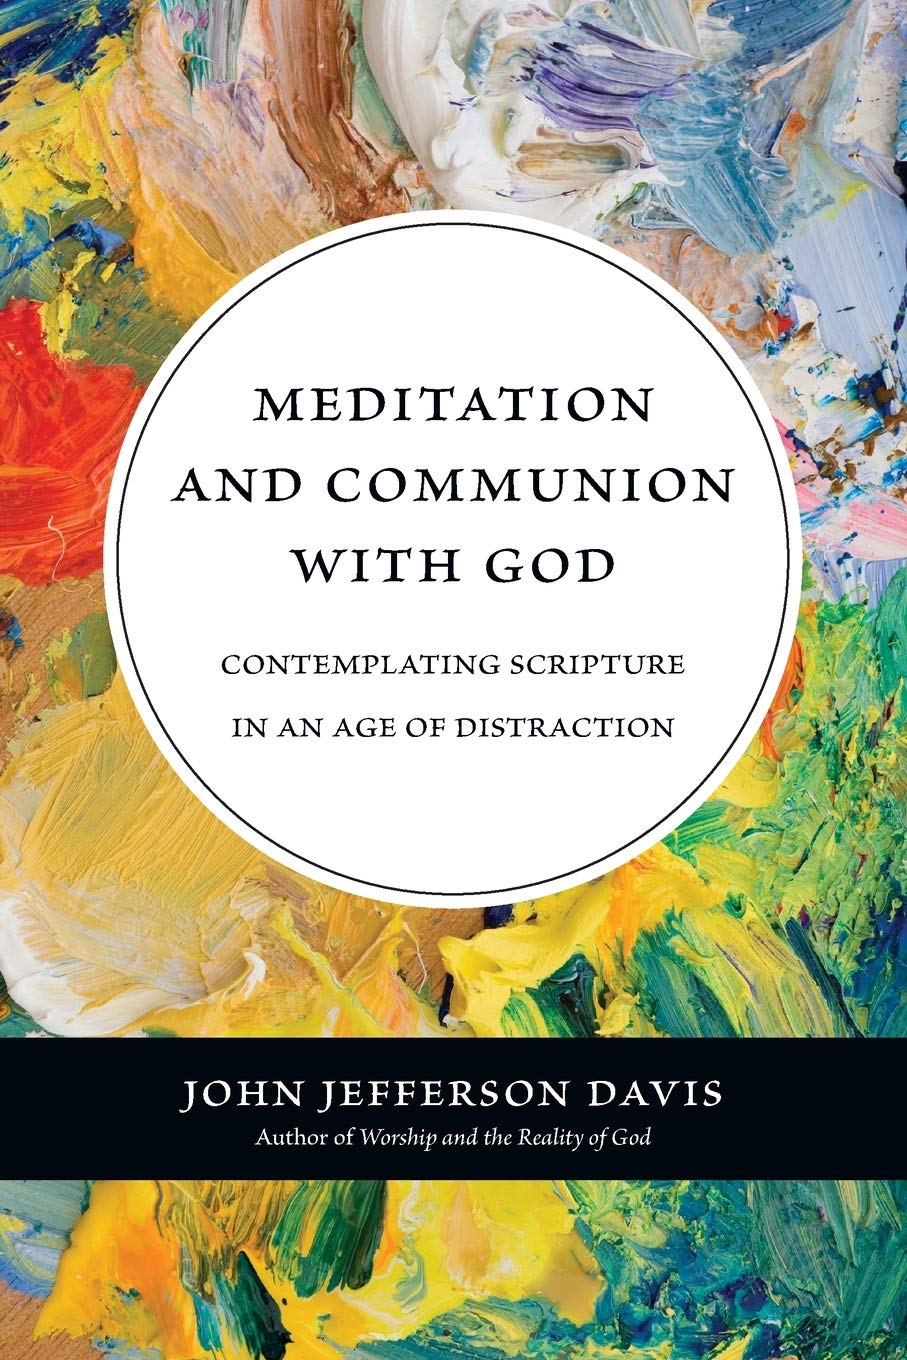 Meditation and Communion with God: Contemplating Scripture in an Age of Distraction, a book recommendation from a Christian Counselor to help with anxiety